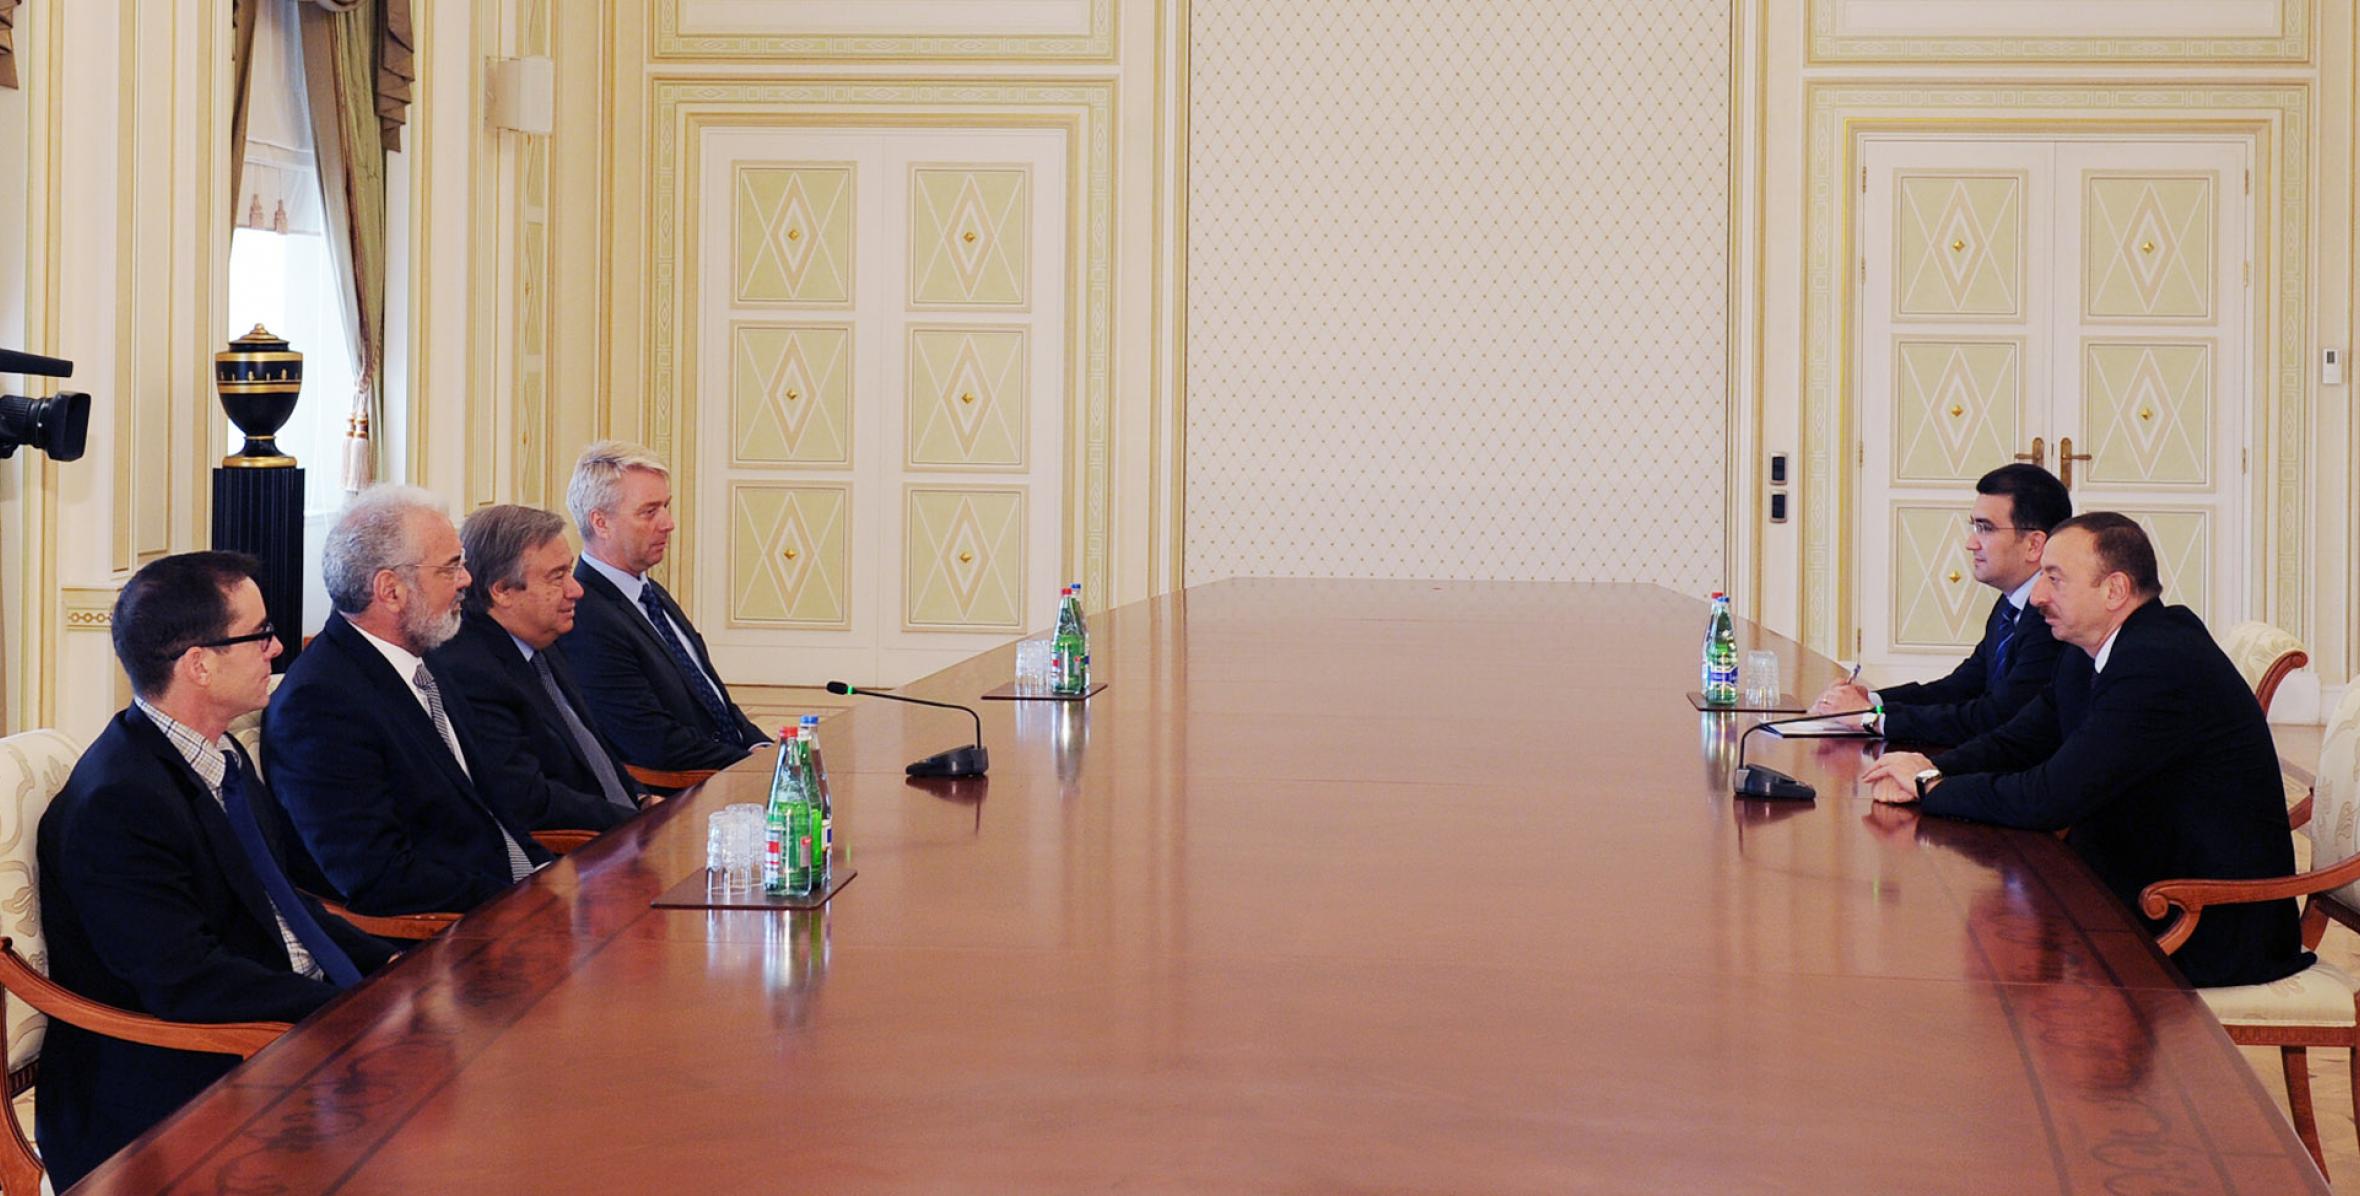 Ilham Aliyev received the head of the UN High Commissioner for Refugees Antonio Guterres